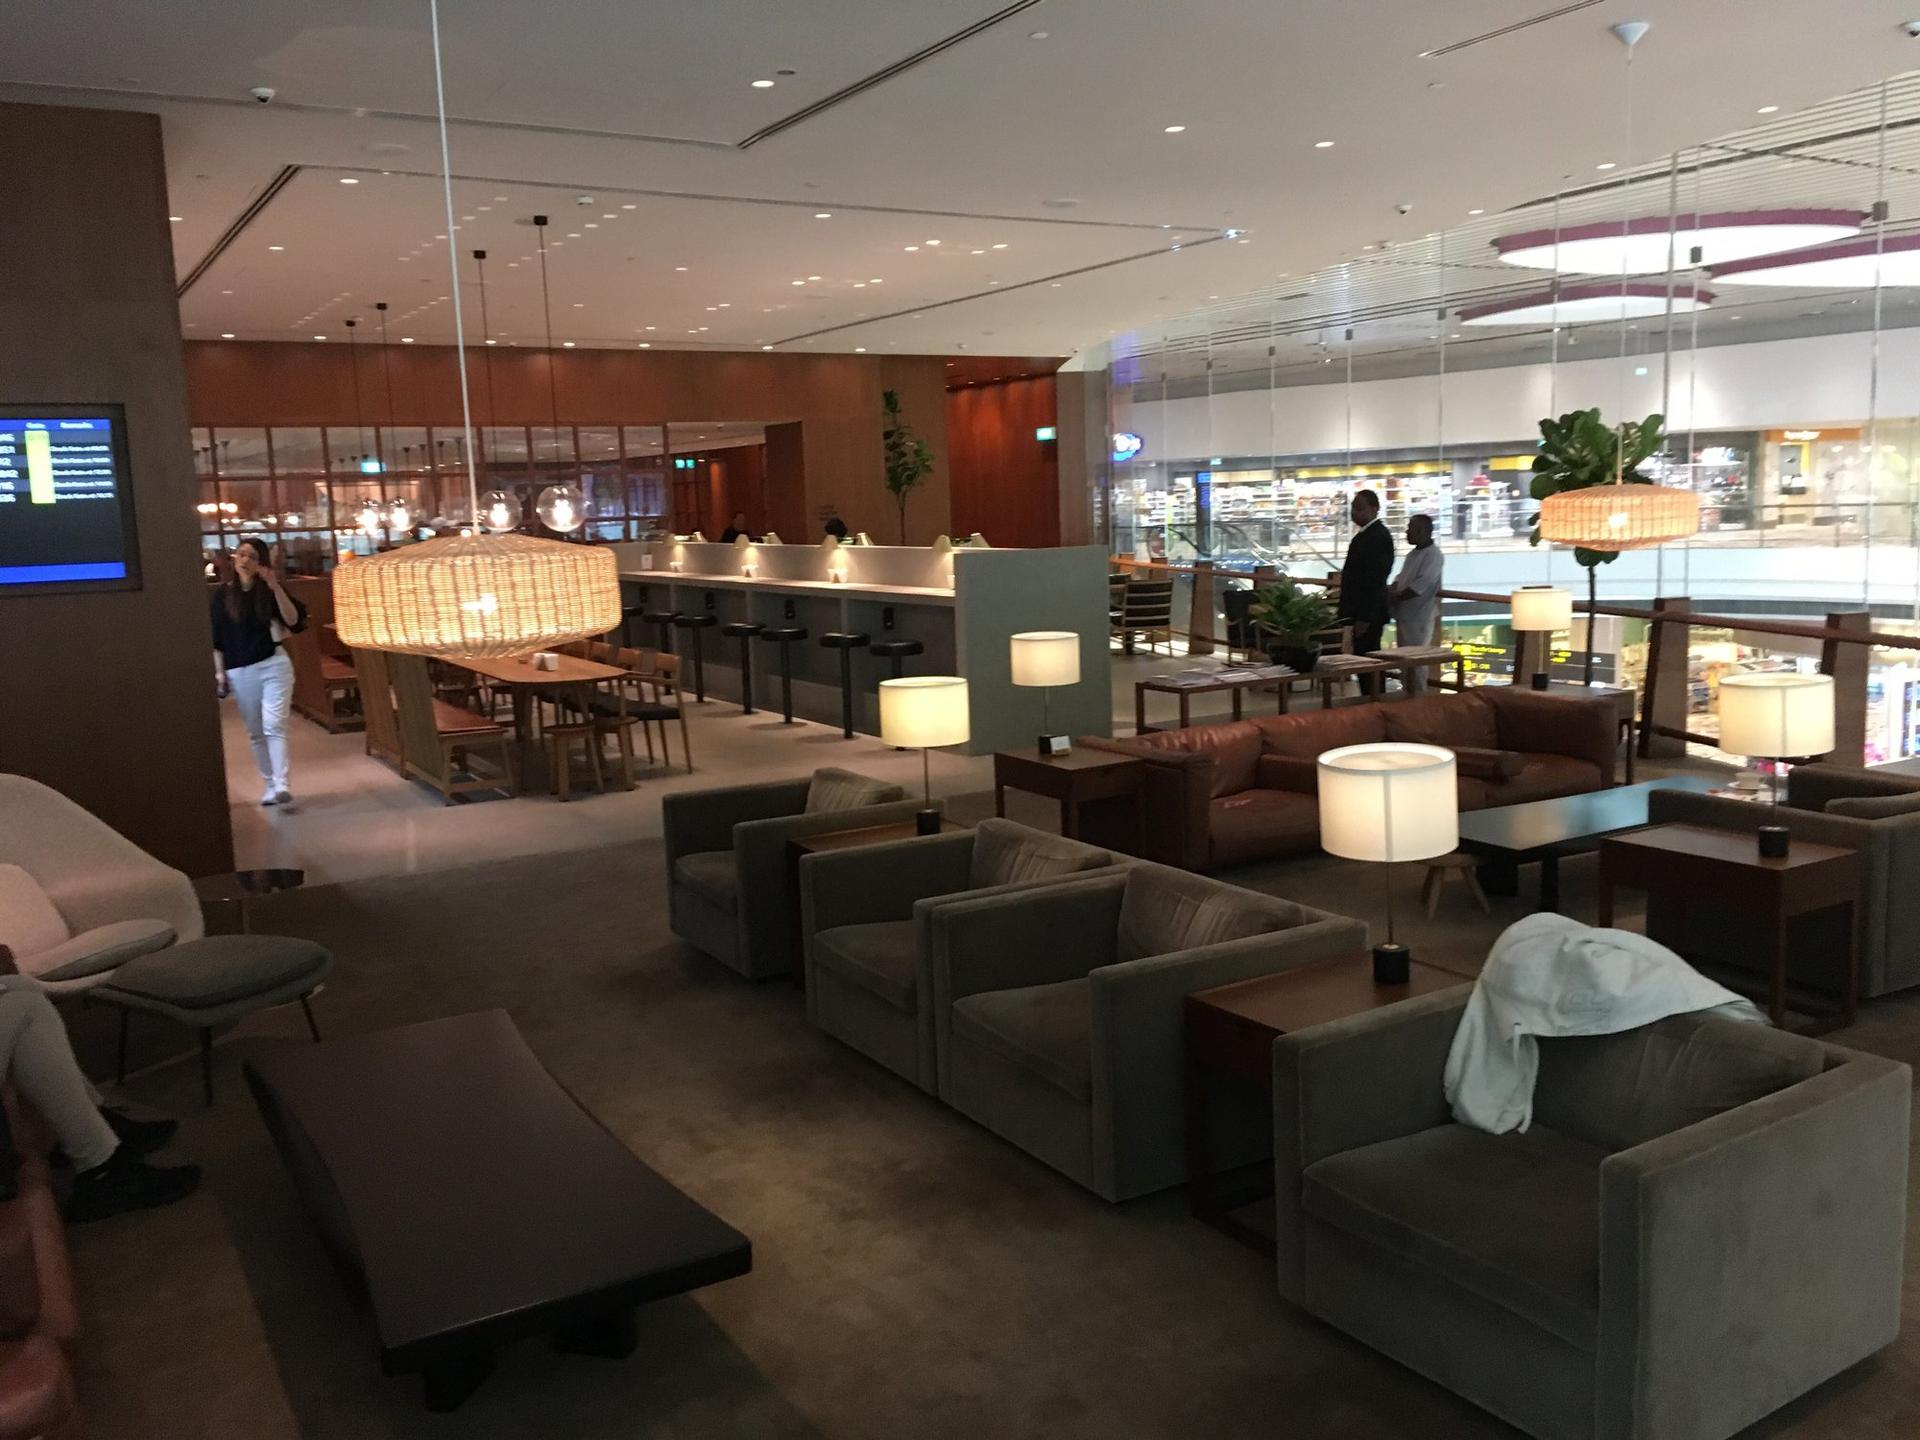 Cathay Pacific Lounge image 35 of 60